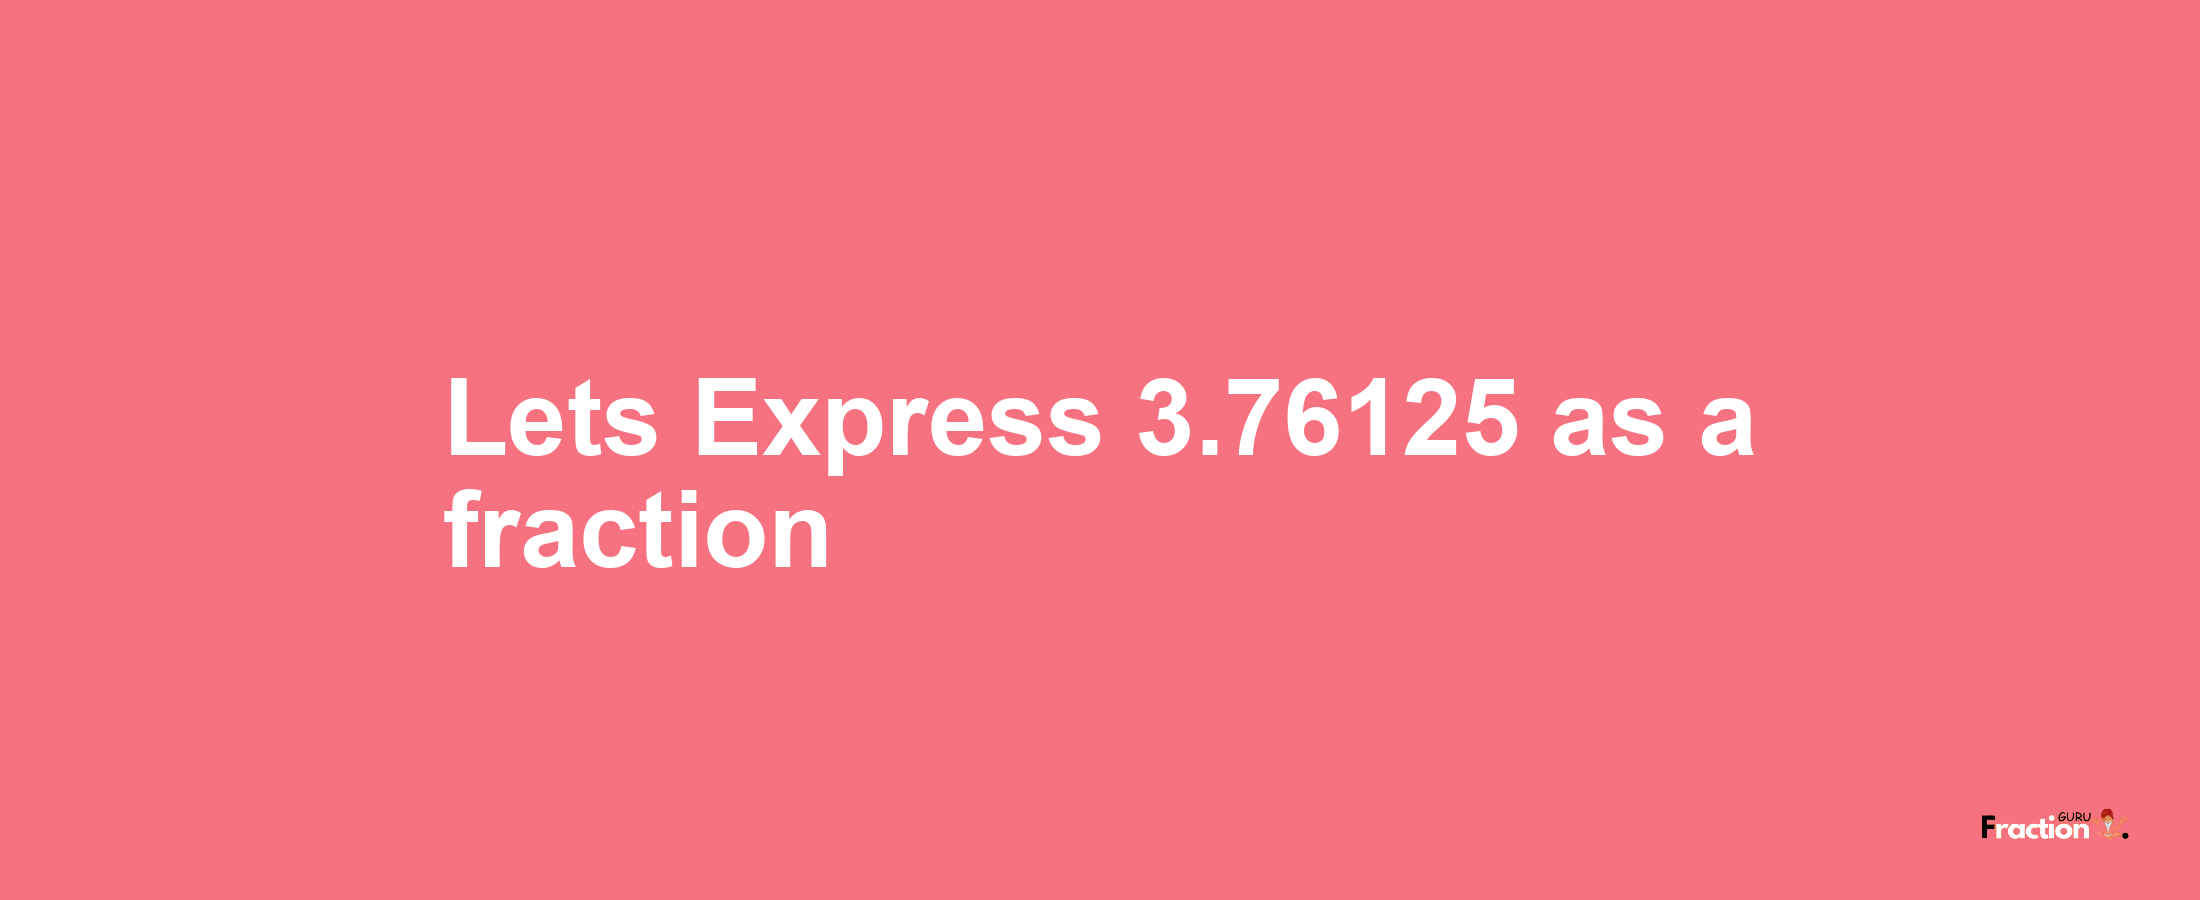 Lets Express 3.76125 as afraction